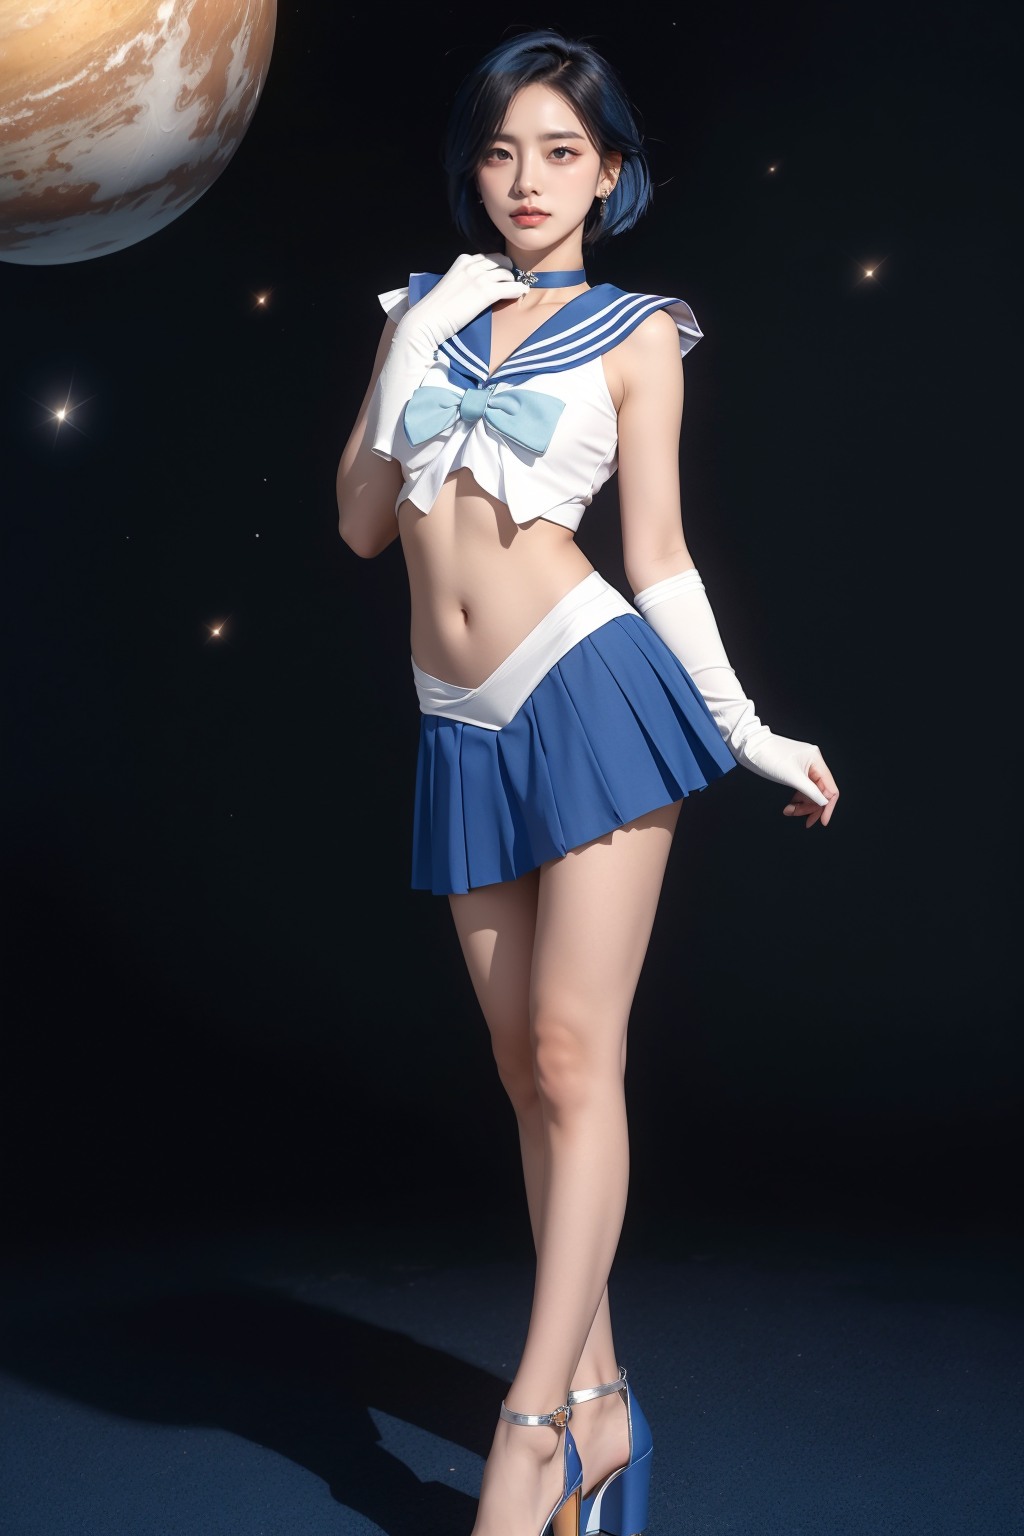 Sailor Moon joins Sailor Mercury 1Favorite for those with short